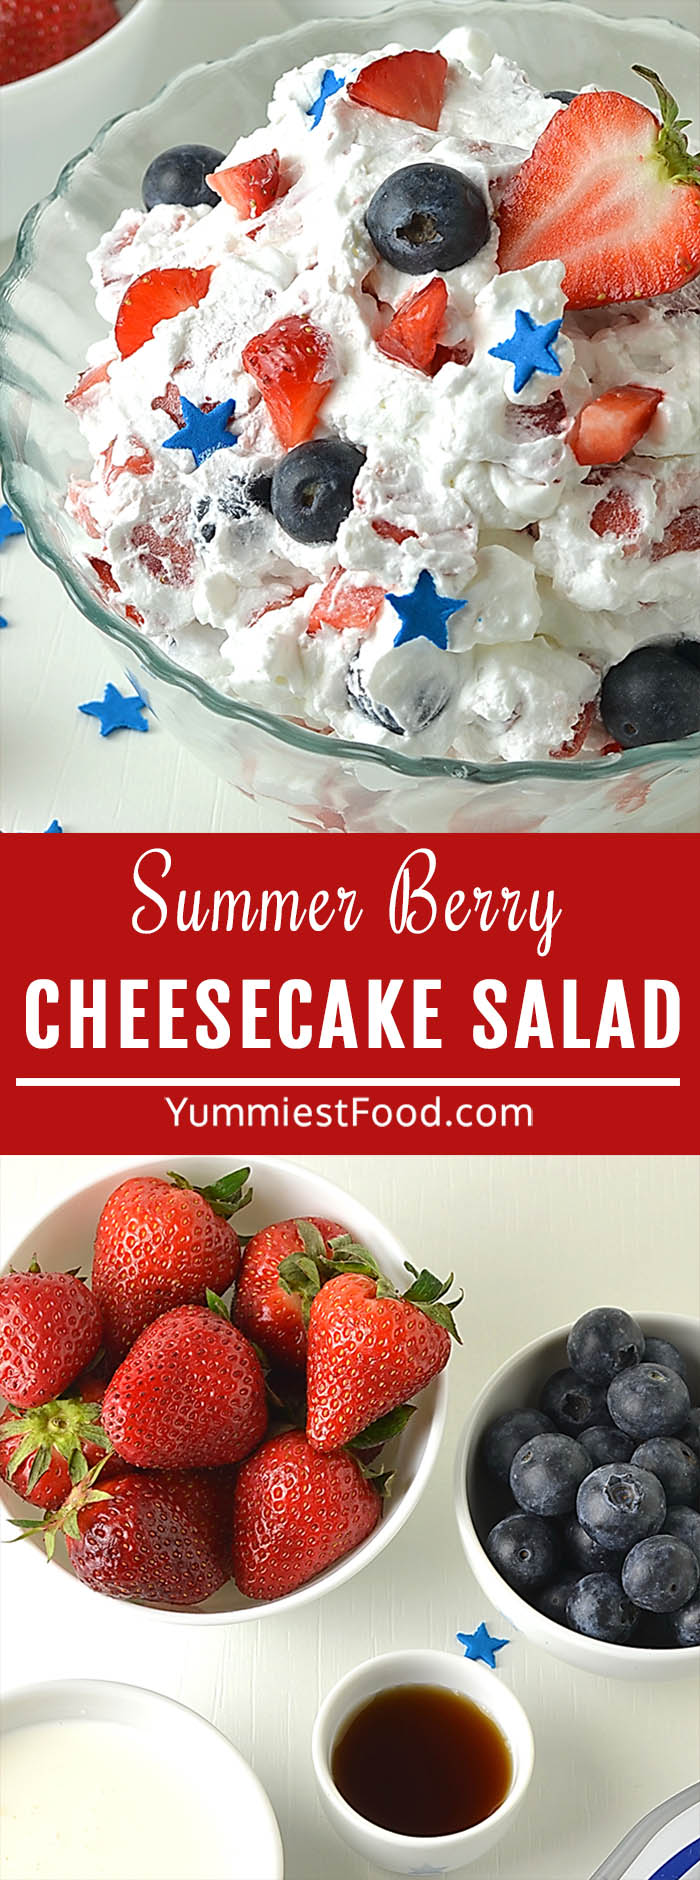 Berry Cheesecake Salad is a delicious dessert salad, filled with the flavors of cheesecake, strawberries and blueberries it's a refreshing summer dessert! It is the perfect patriotic dessert for Memorial Day and 4th of July!